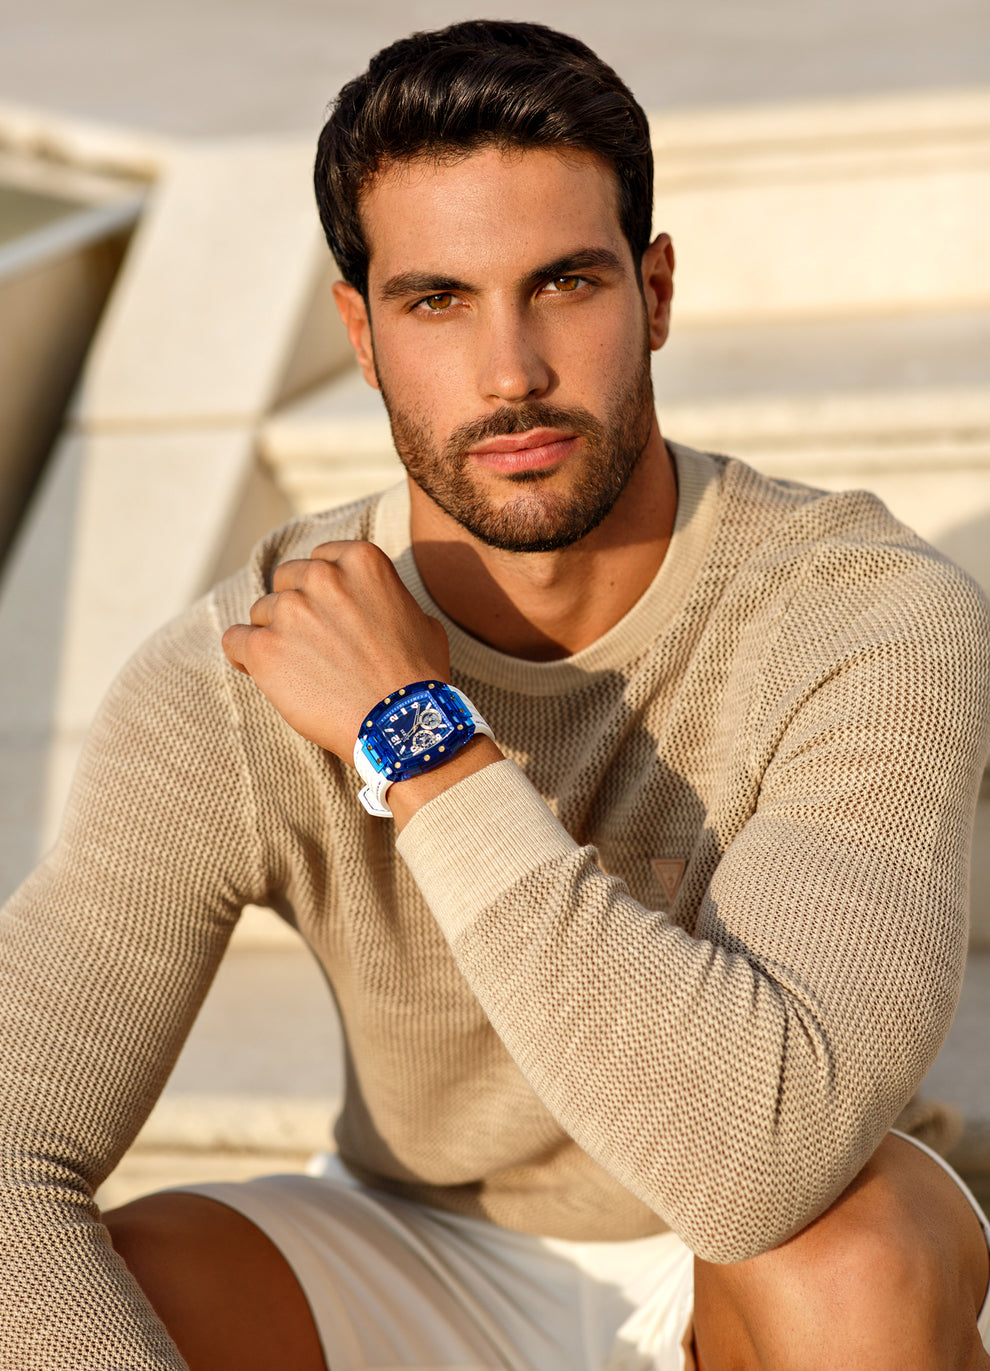 man wearing white and blue watch